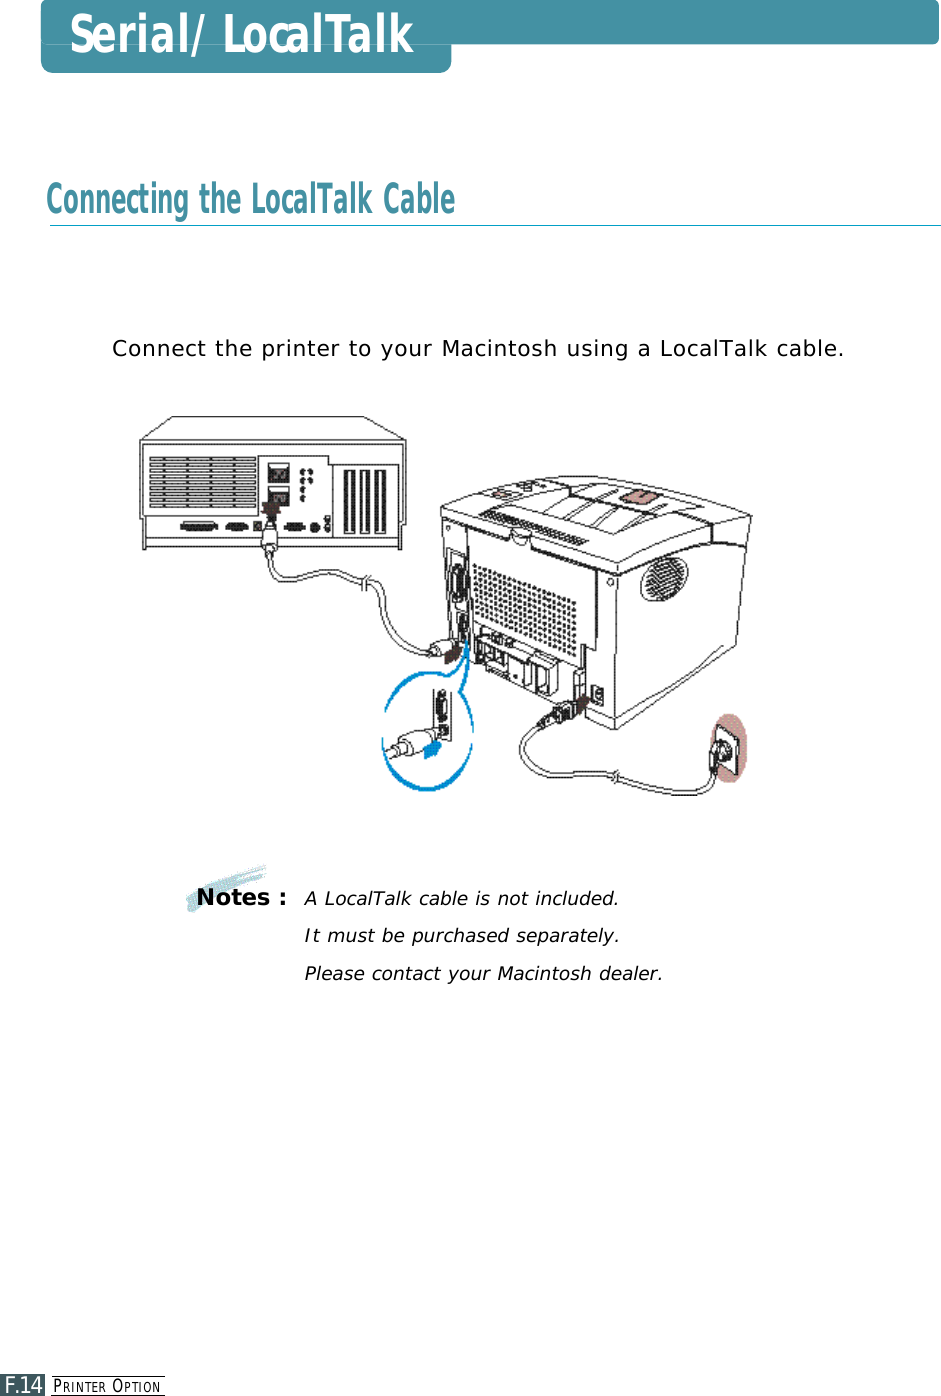 PR I N T E R OP T I O NF.14Connect the printer to your Macintosh using a LocalTalk cable.Notes :  A LocalTalk cable is not included. It must be purchased separately. Please contact your Macintosh dealer.Connecting the LocalTalk CableSerial/LocalTalk